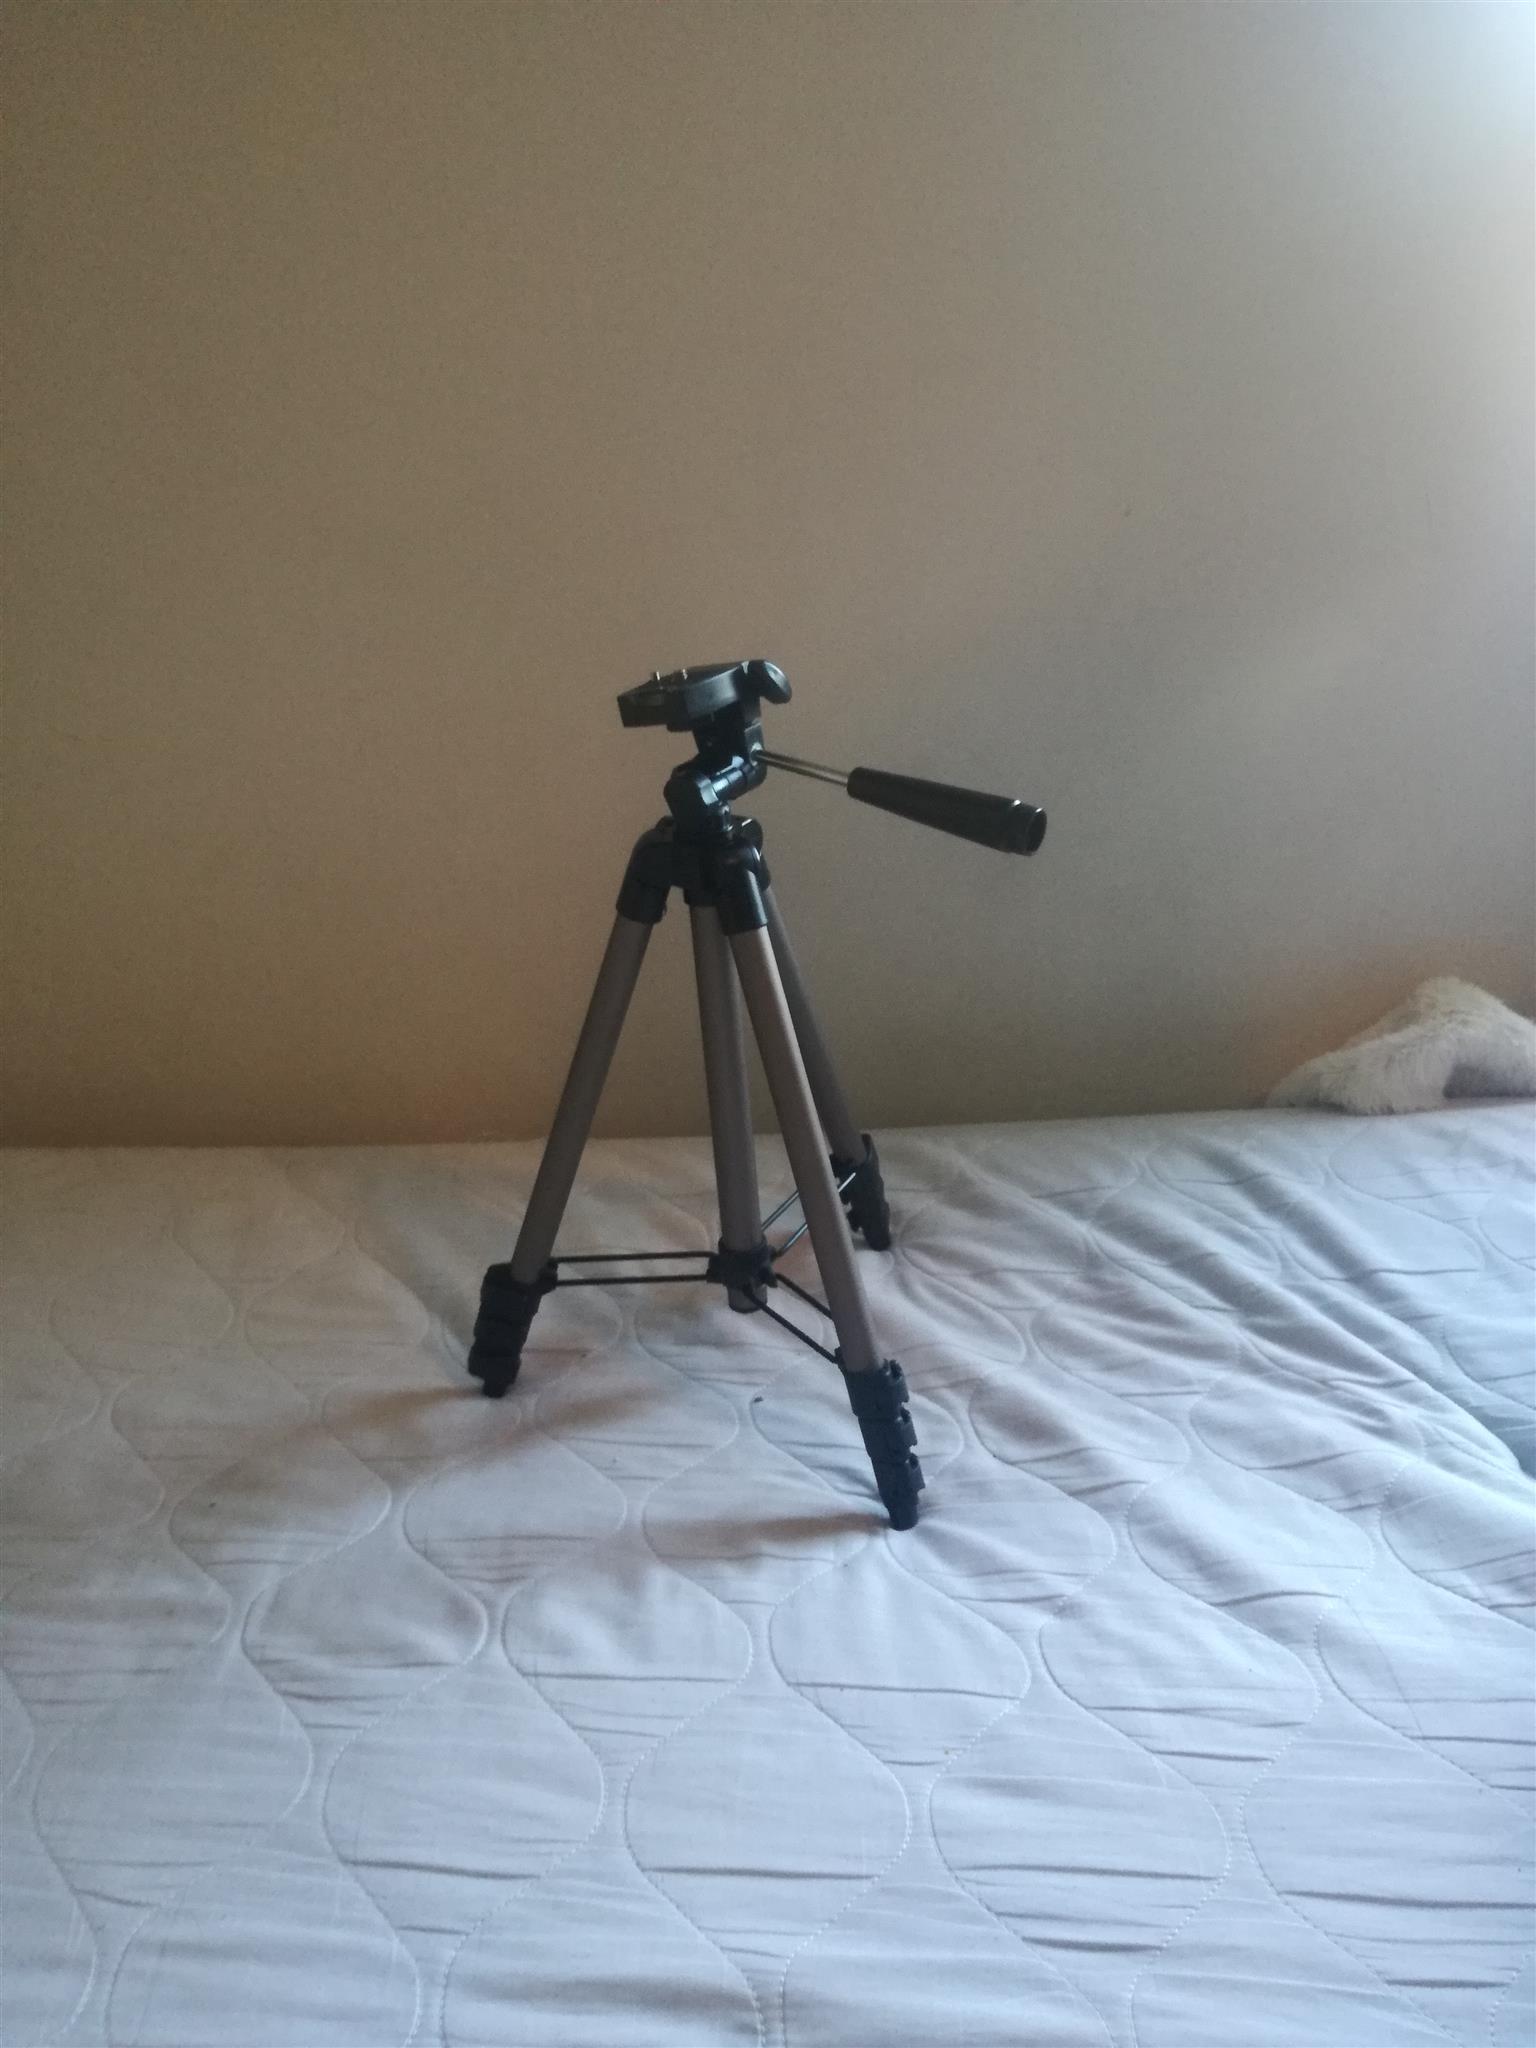 Hy I am selling my camera tripod serious buyers please message me on this number